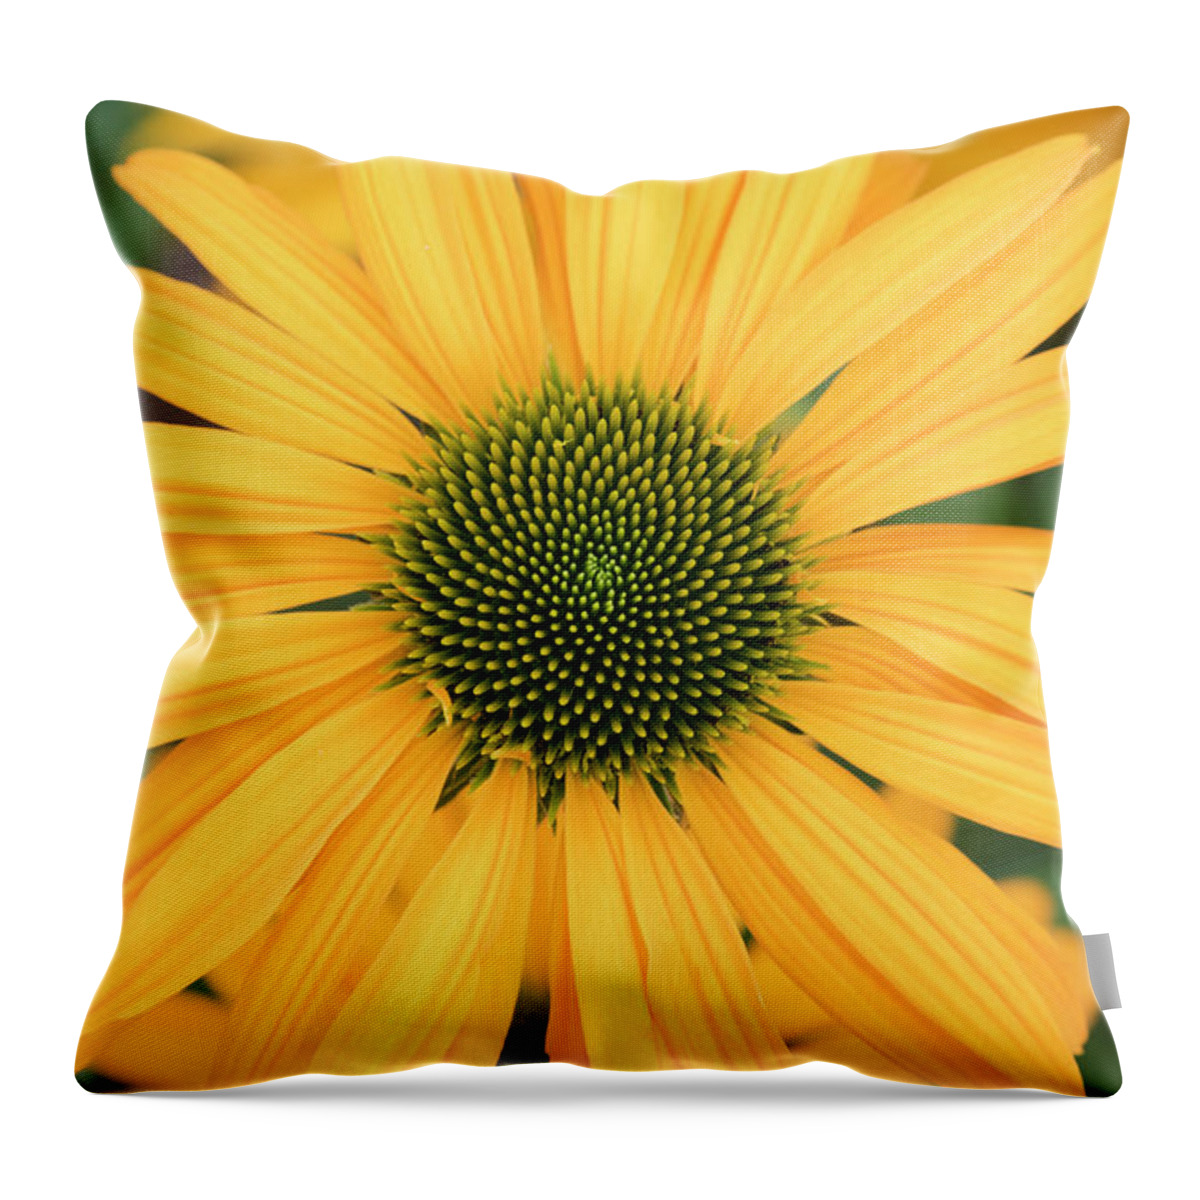 Echinacea Now Cheesier Throw Pillow featuring the photograph Echinacea Now Cheesier Flower by Tim Gainey